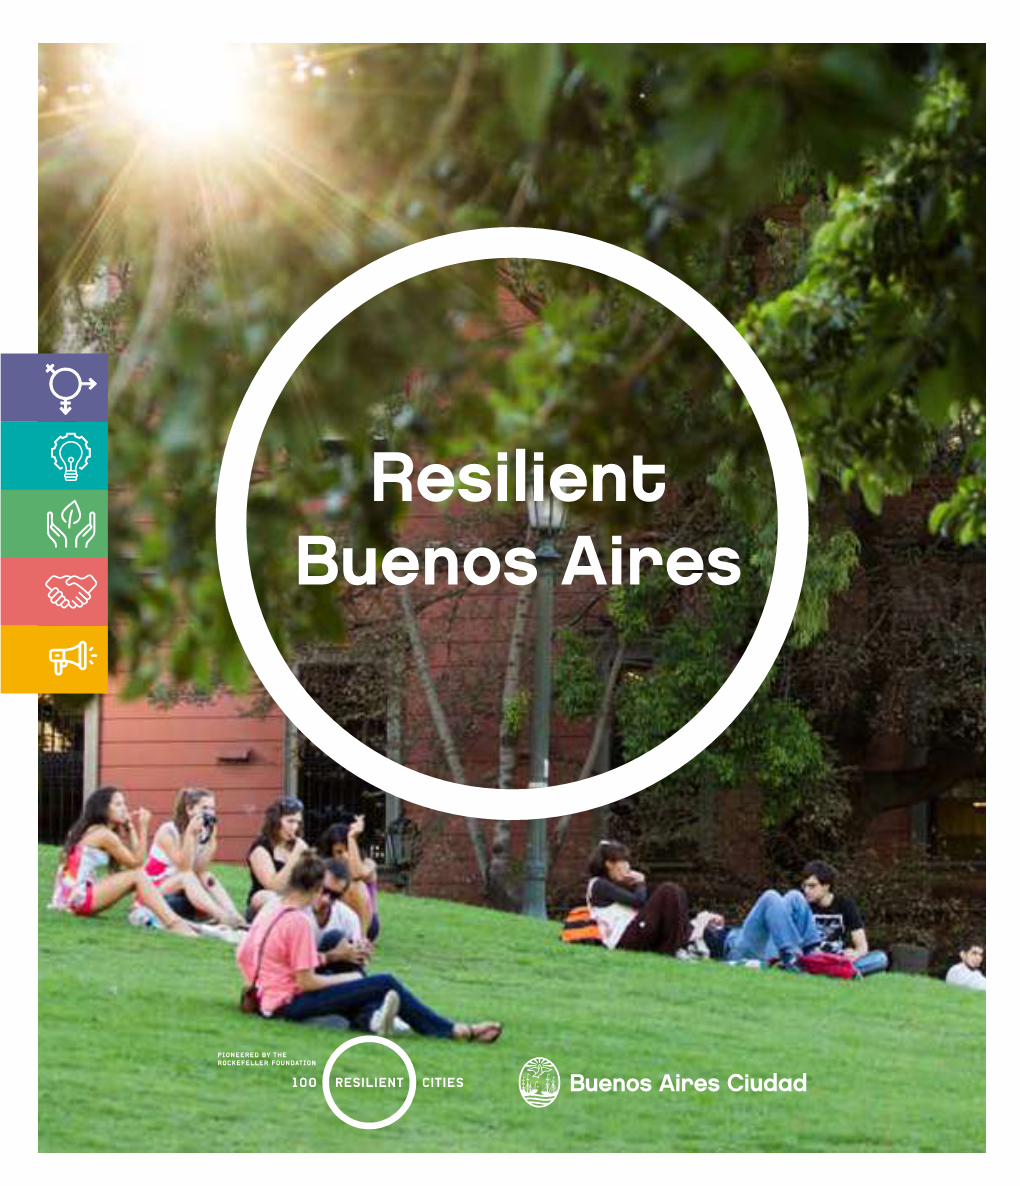 Buenos Aires Resiliente